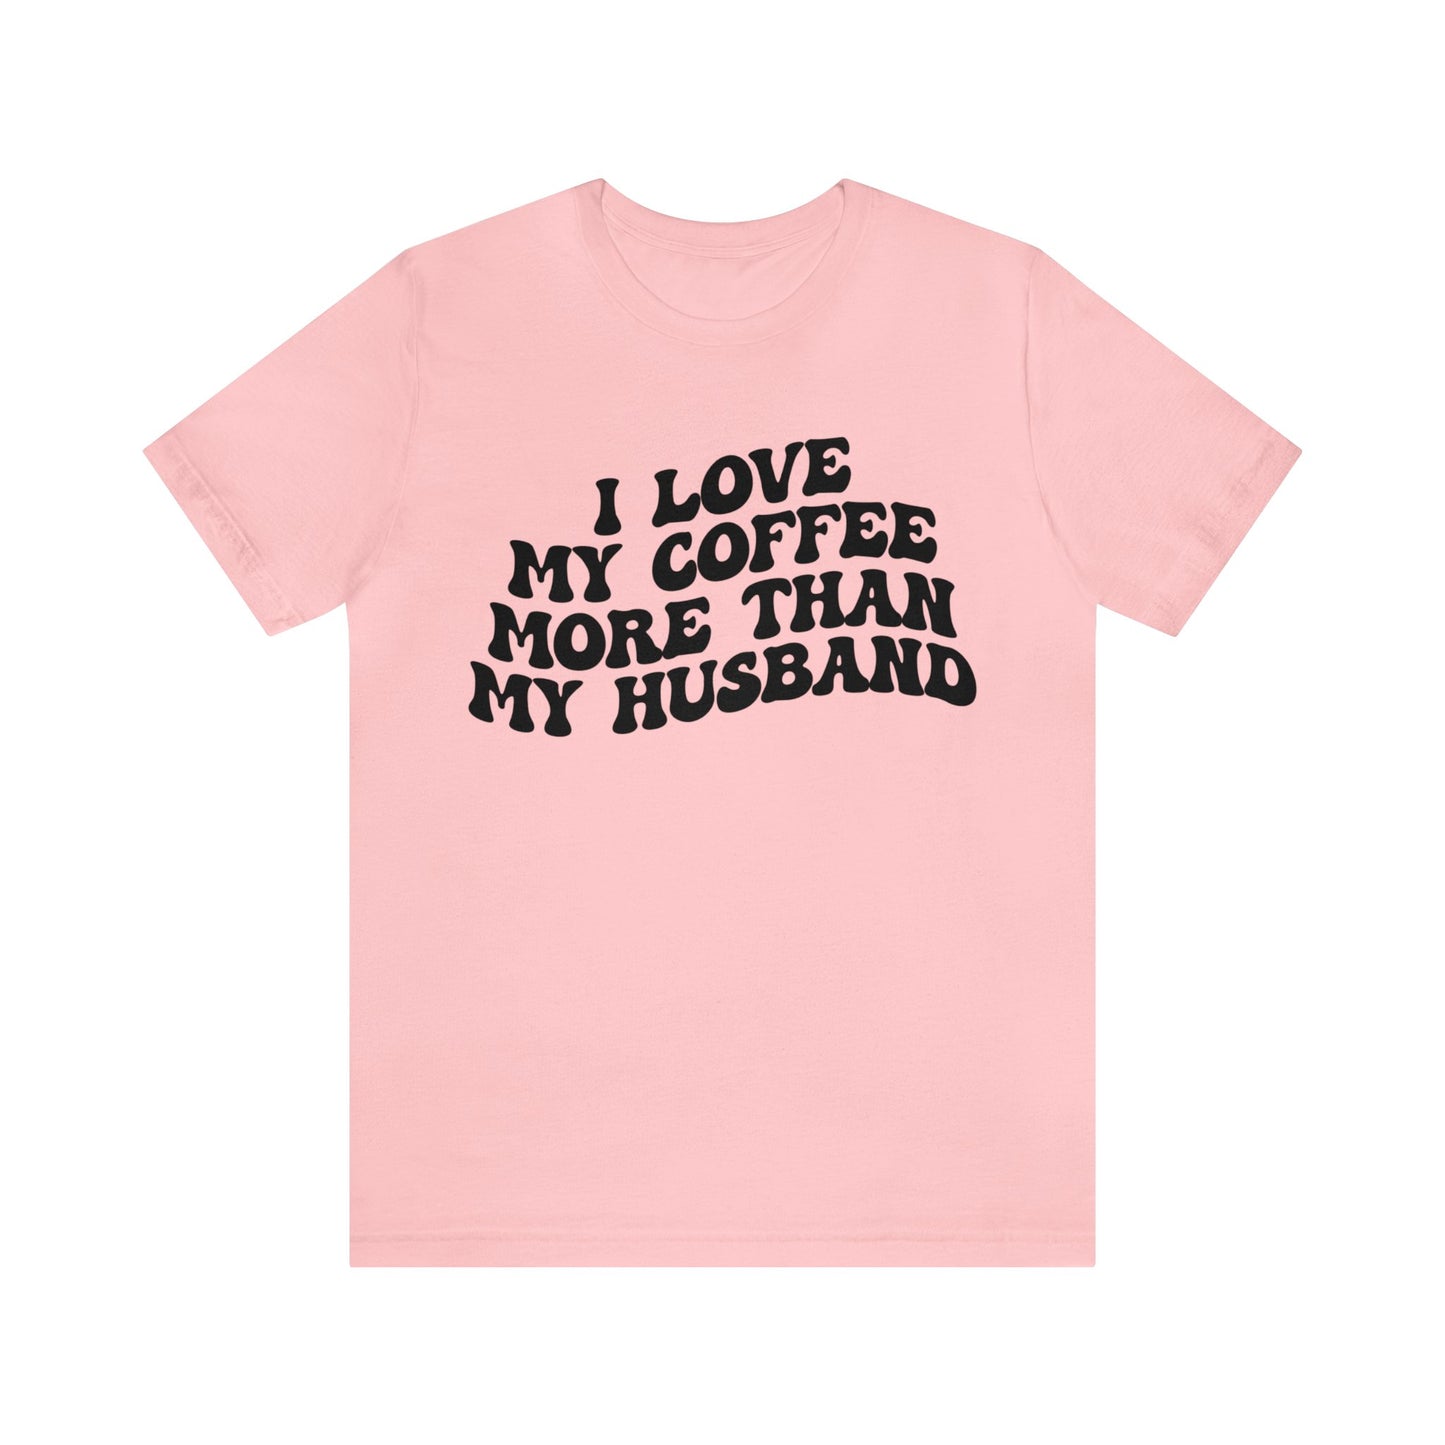 I Love My Coffee More Than My Husband Shirt, Funny Coffee Shirt, Husband Gift, Gift For Husband, Gift for lover Coffee, T1438